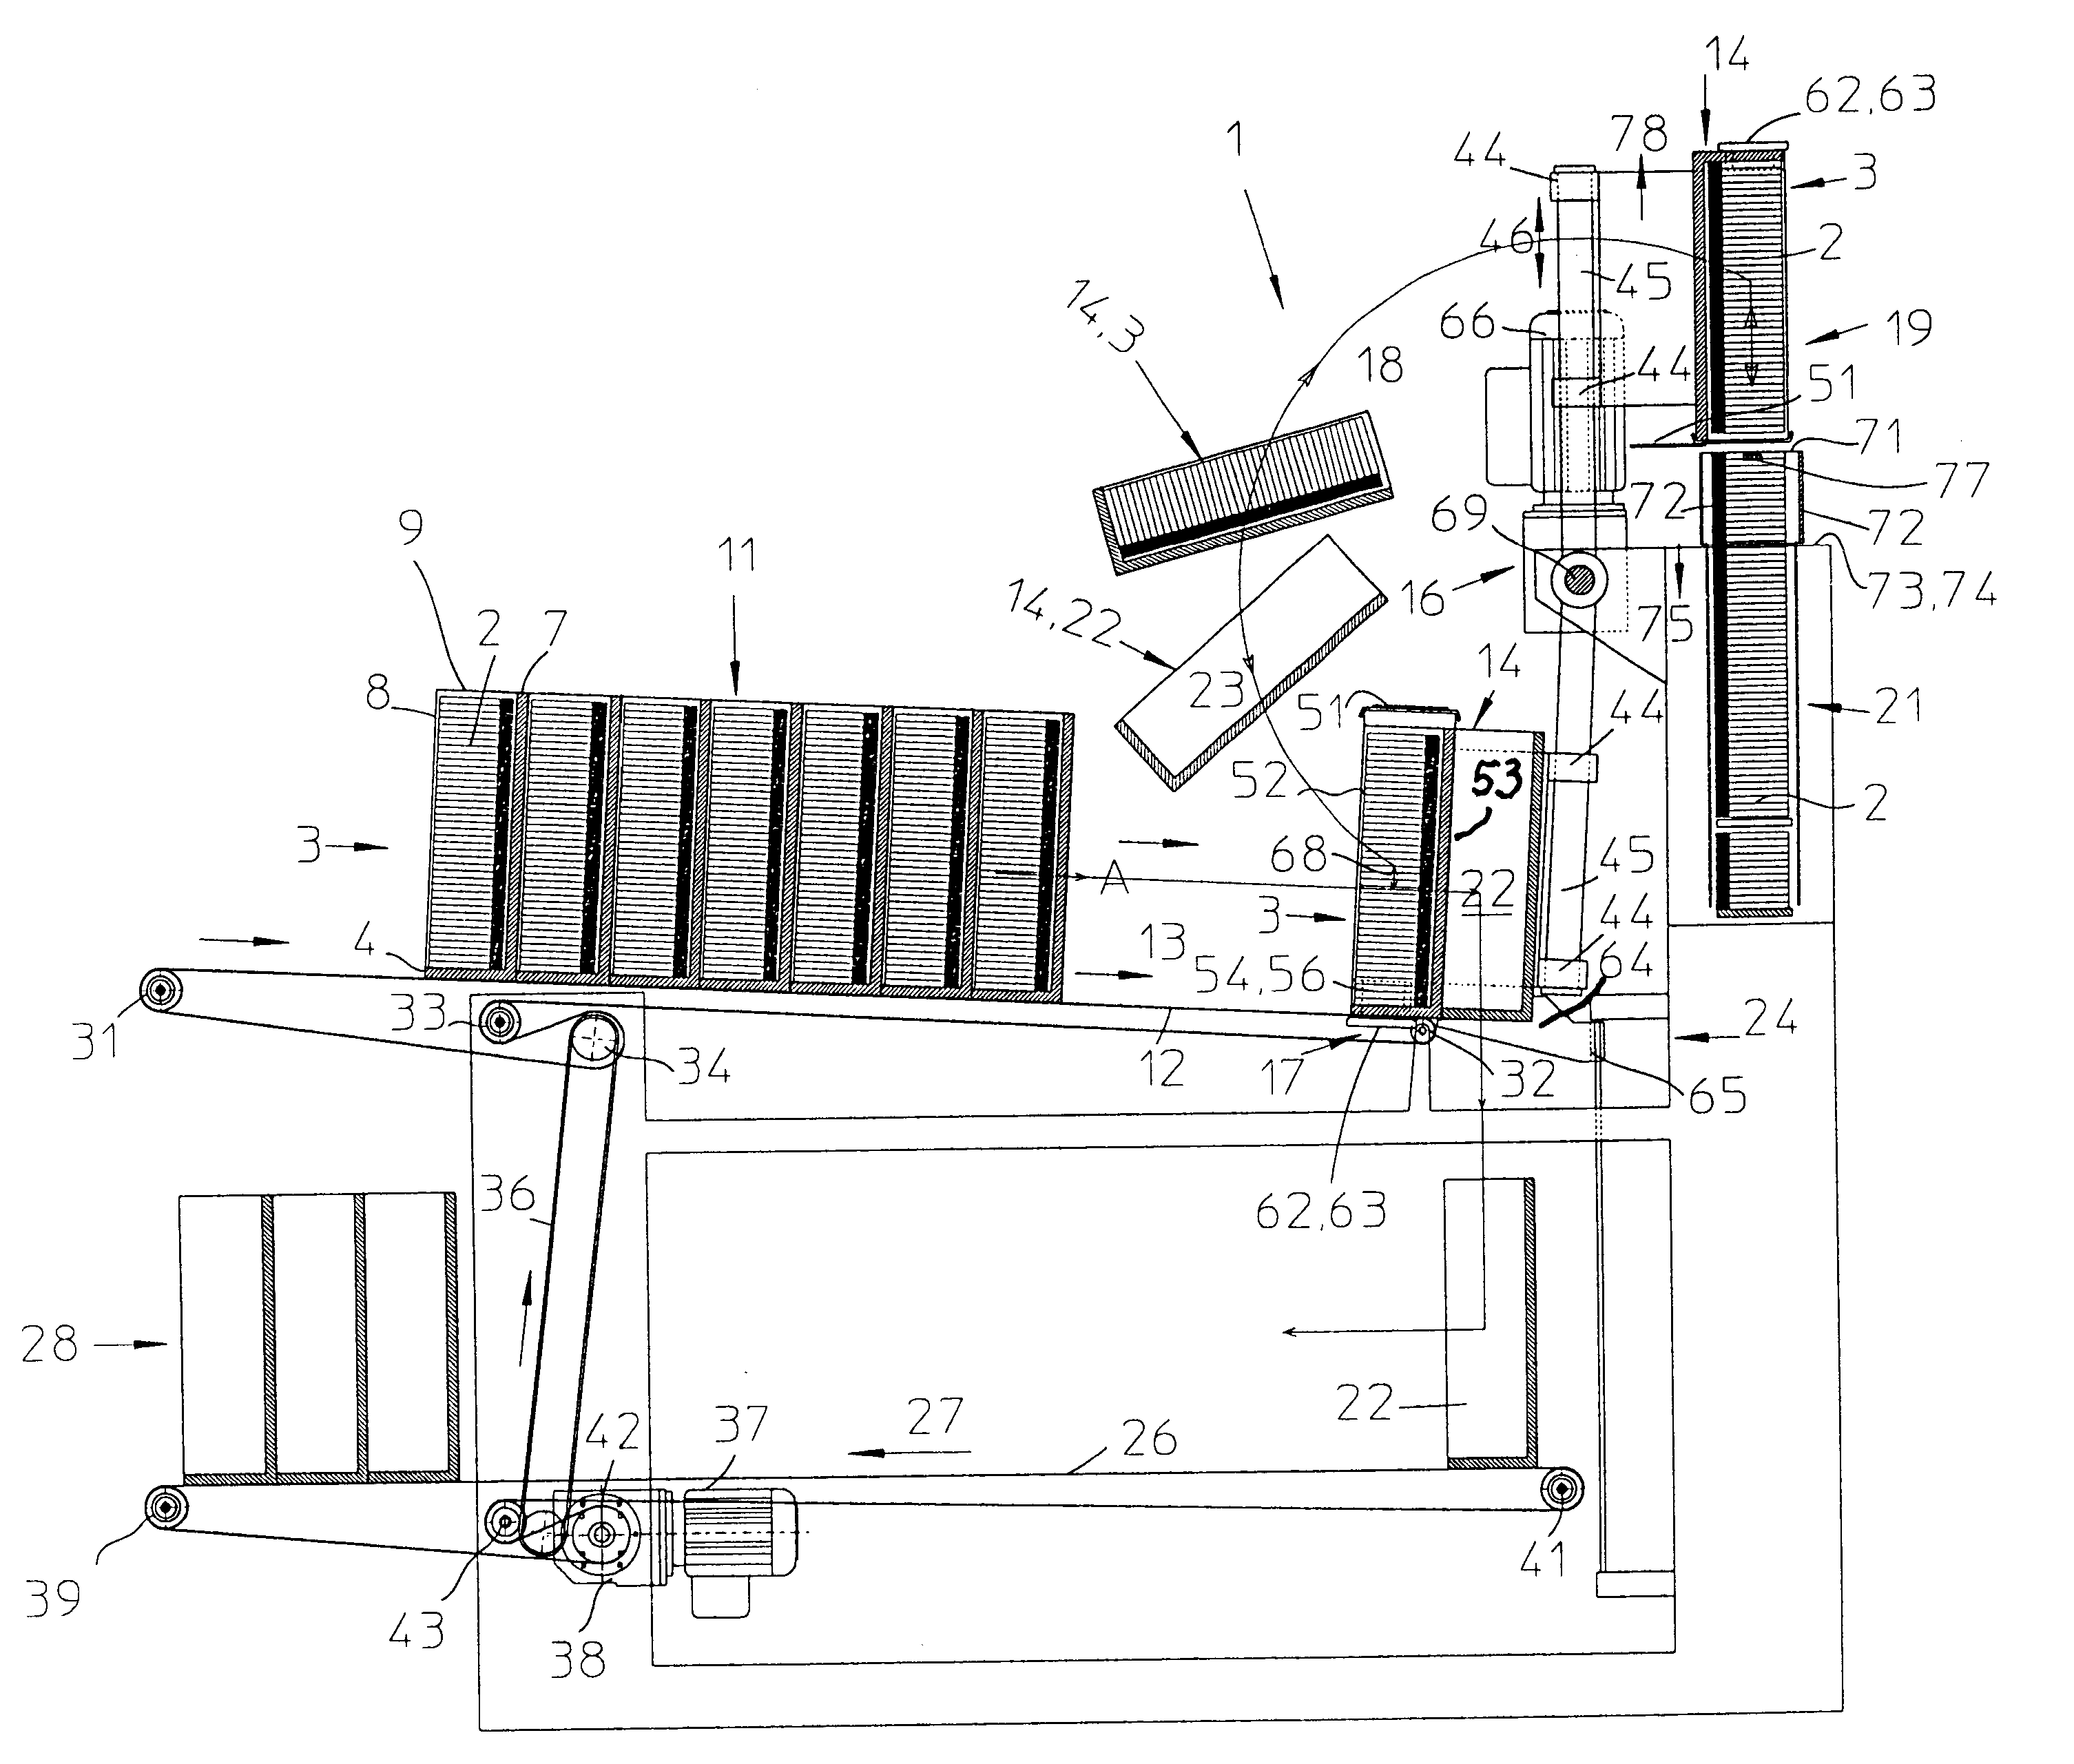 Method of and apparatus for emptying containers